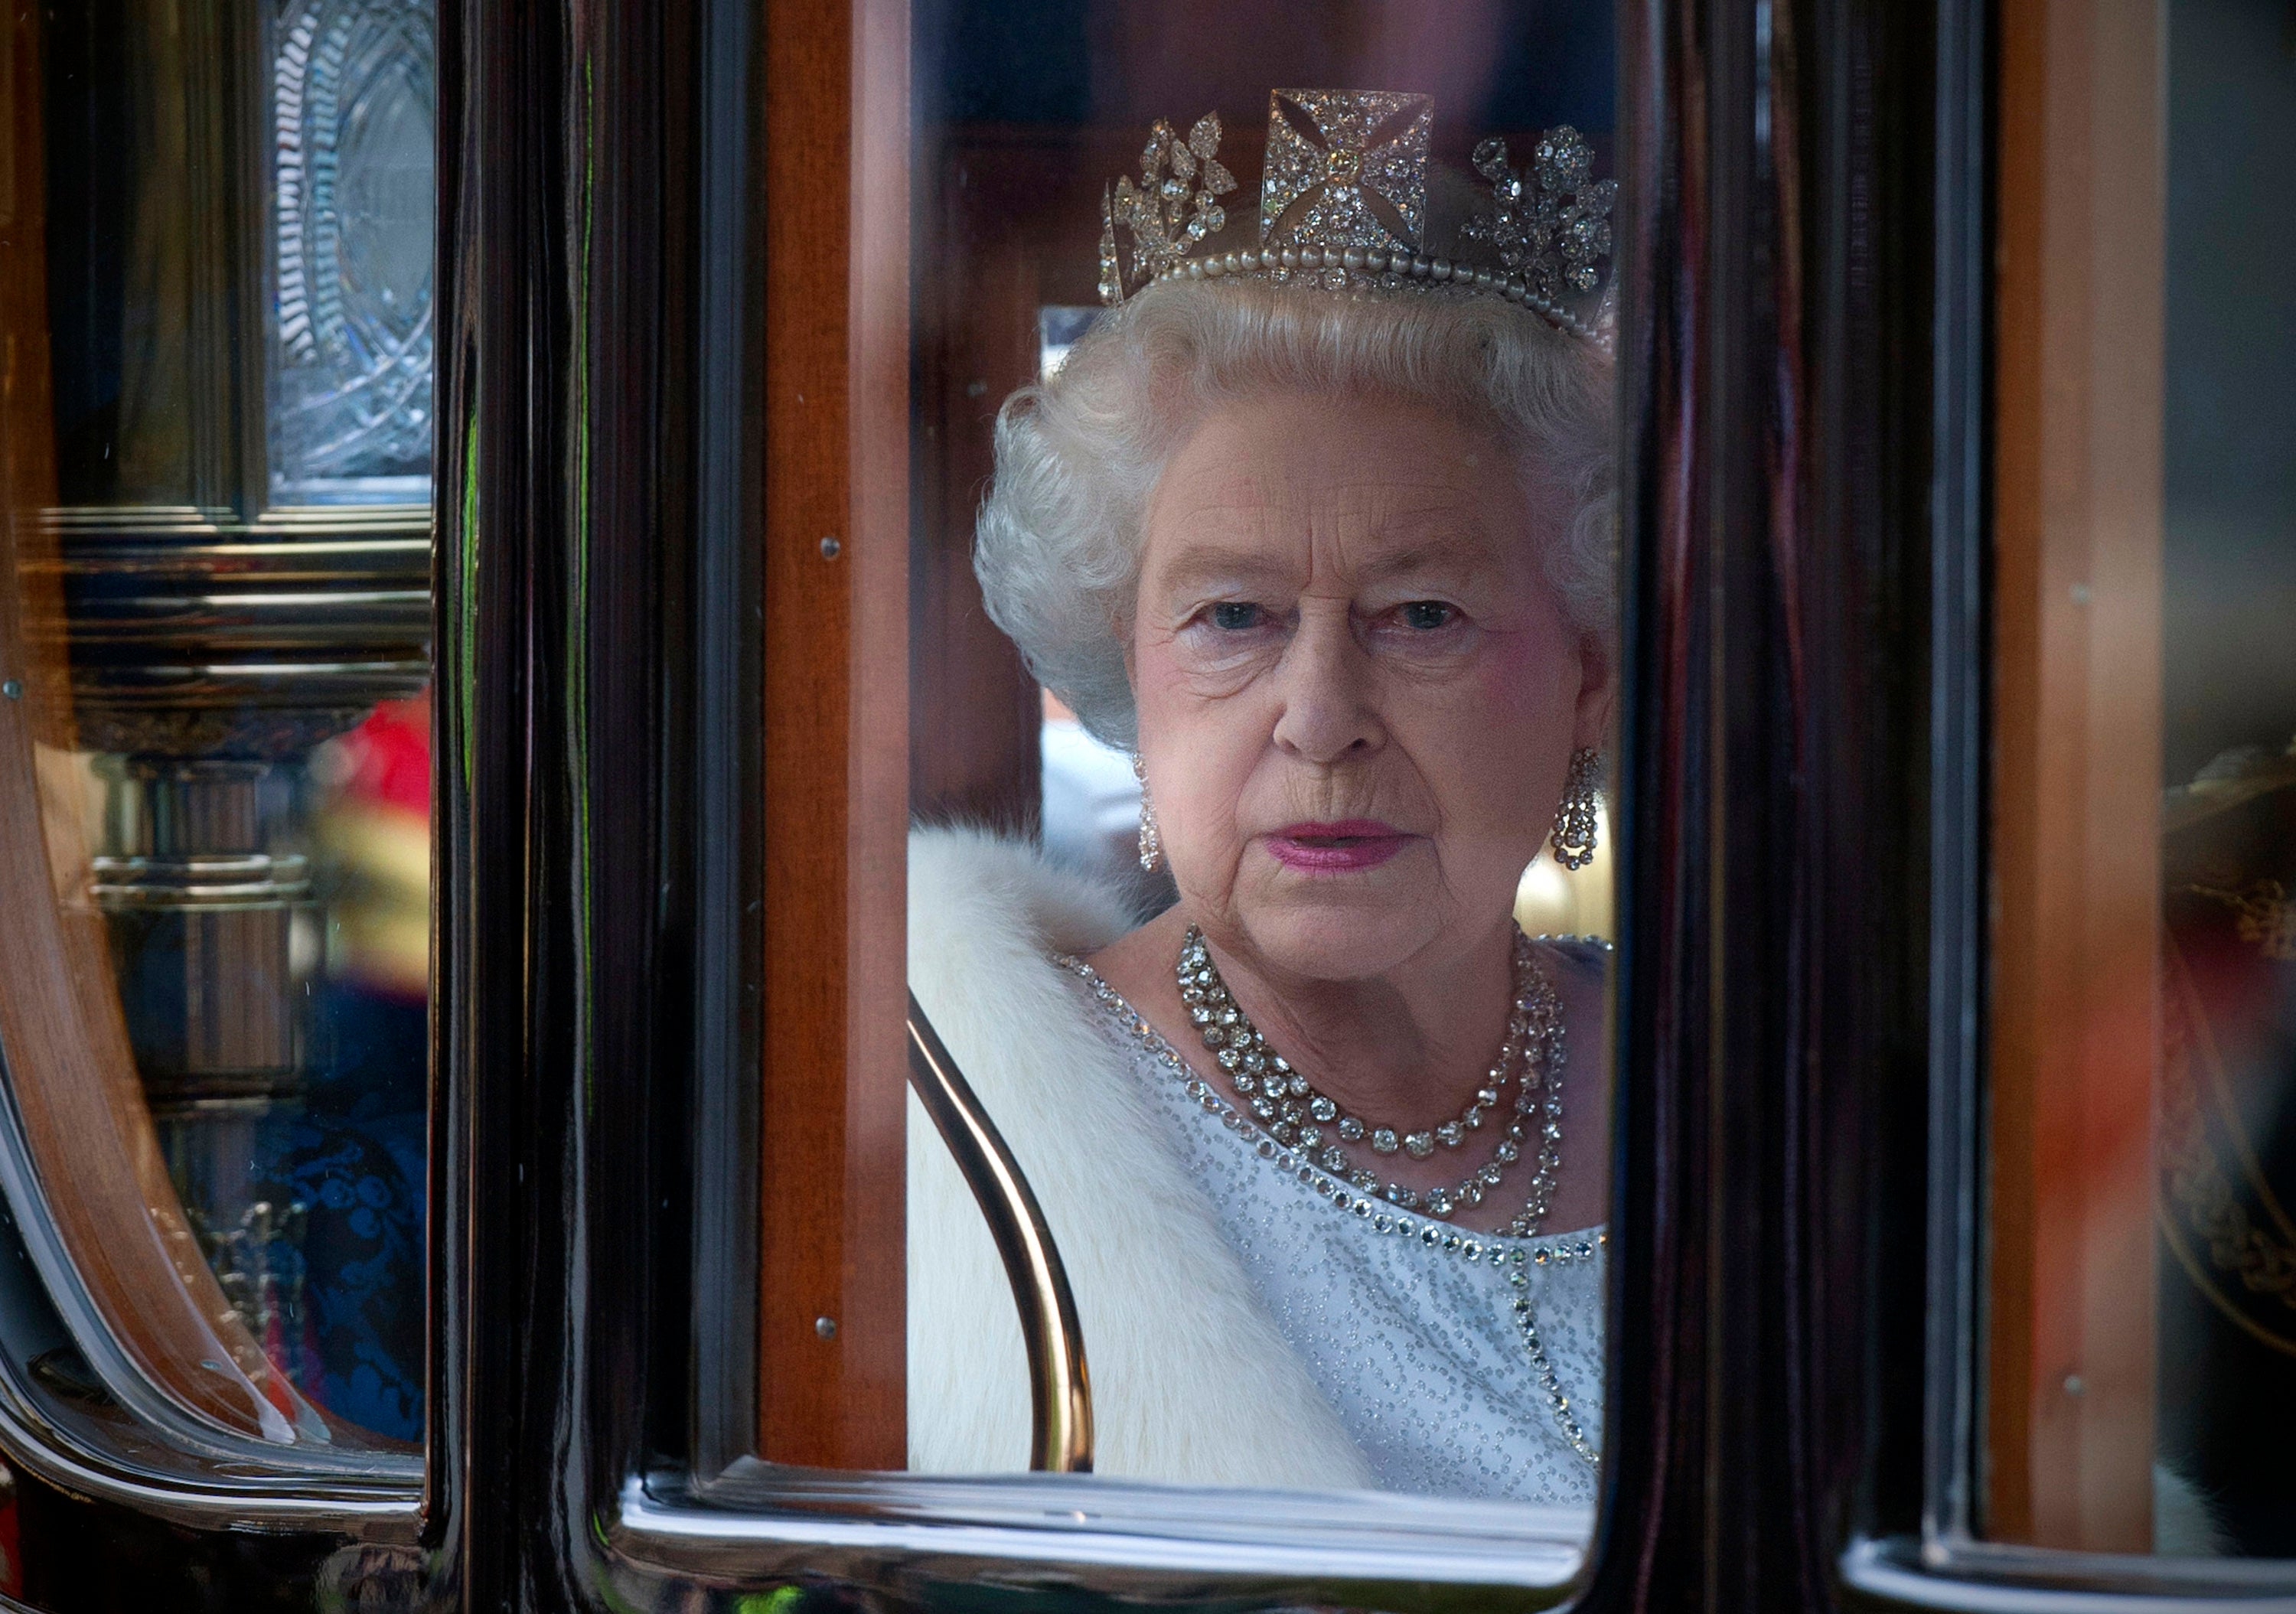 Queen Elizabeth II wears the George VI Festoon Necklace to the State Opening of Parliament on 9 May 2012